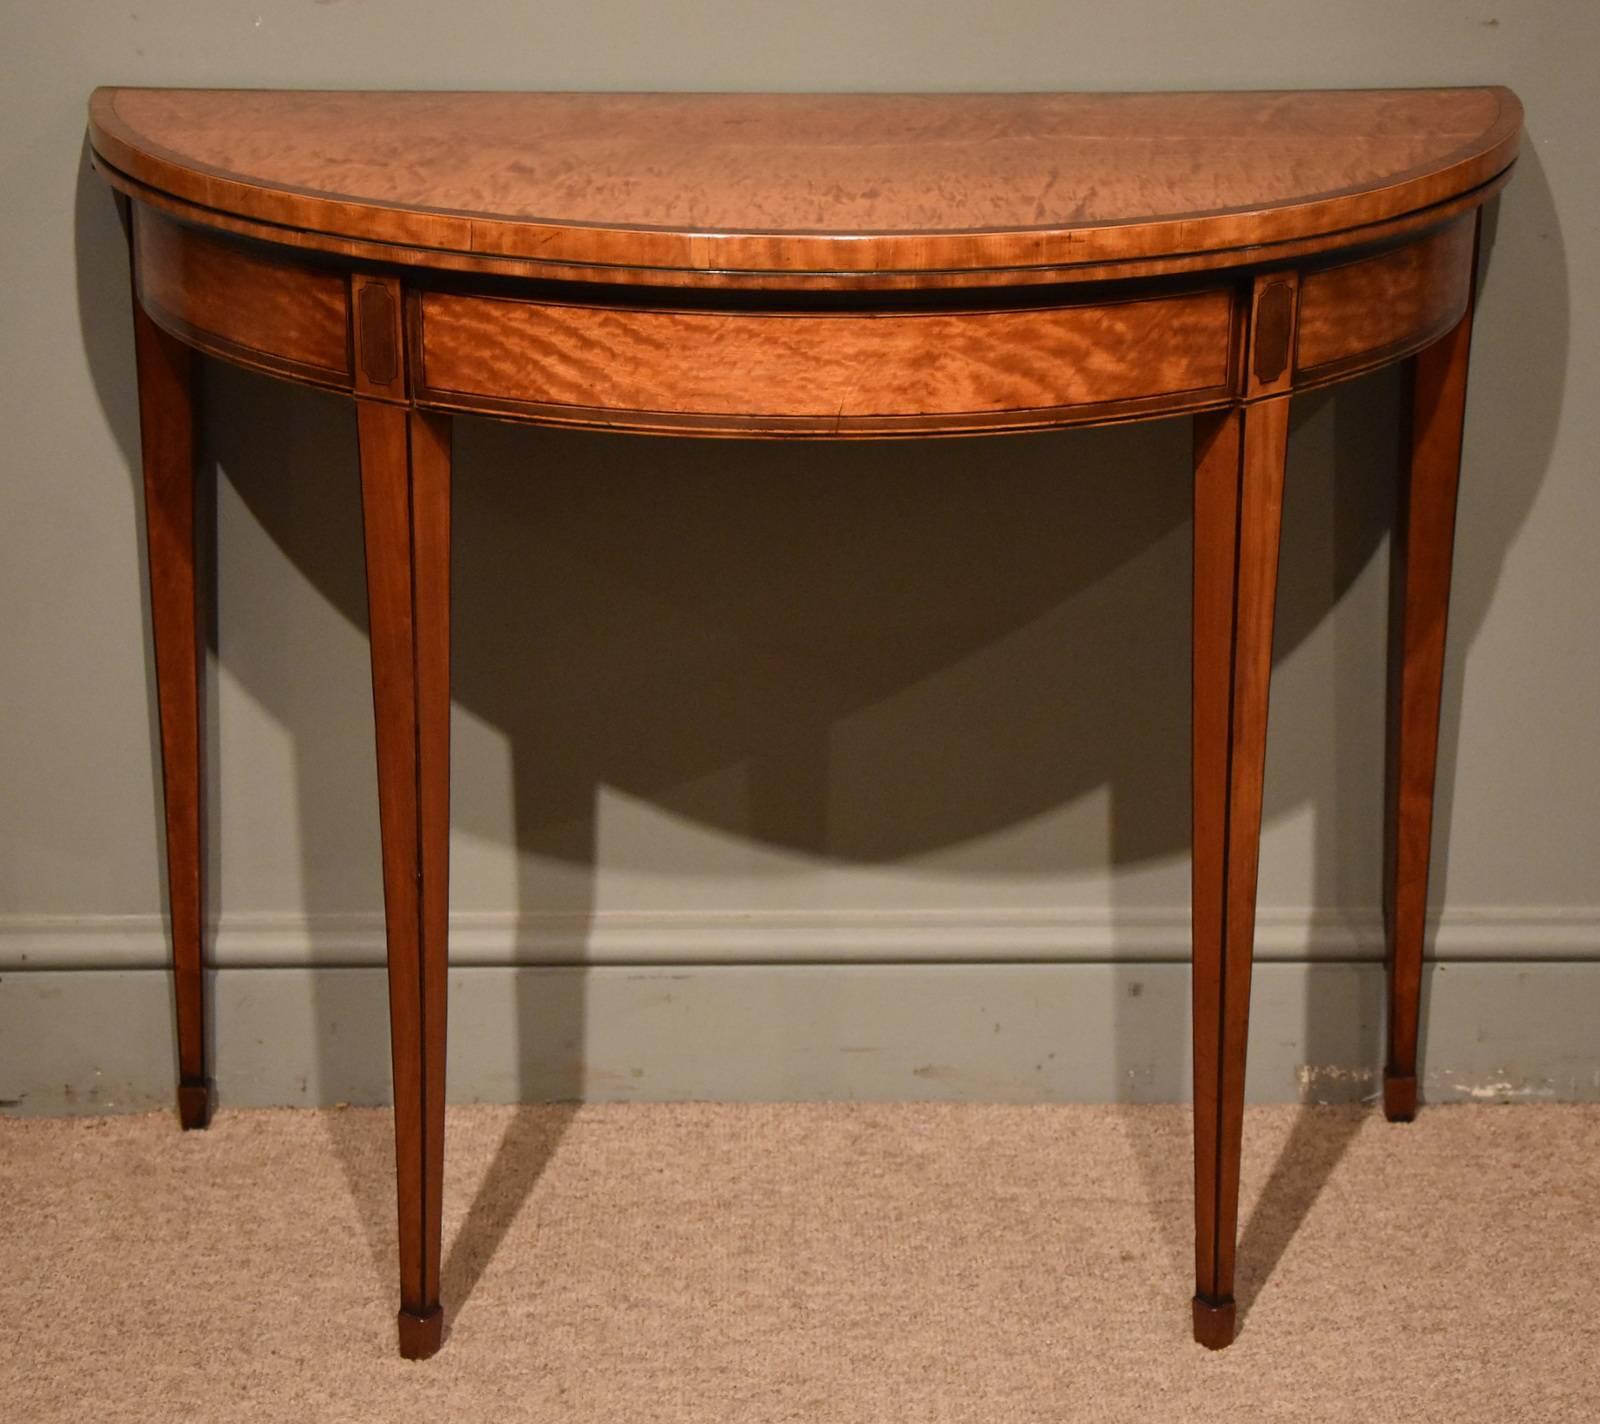 An elegant George III satinwood card table with purple heart crossbanding, of demilune form with purple heart borders and decoration.

Measures: Height 28.5